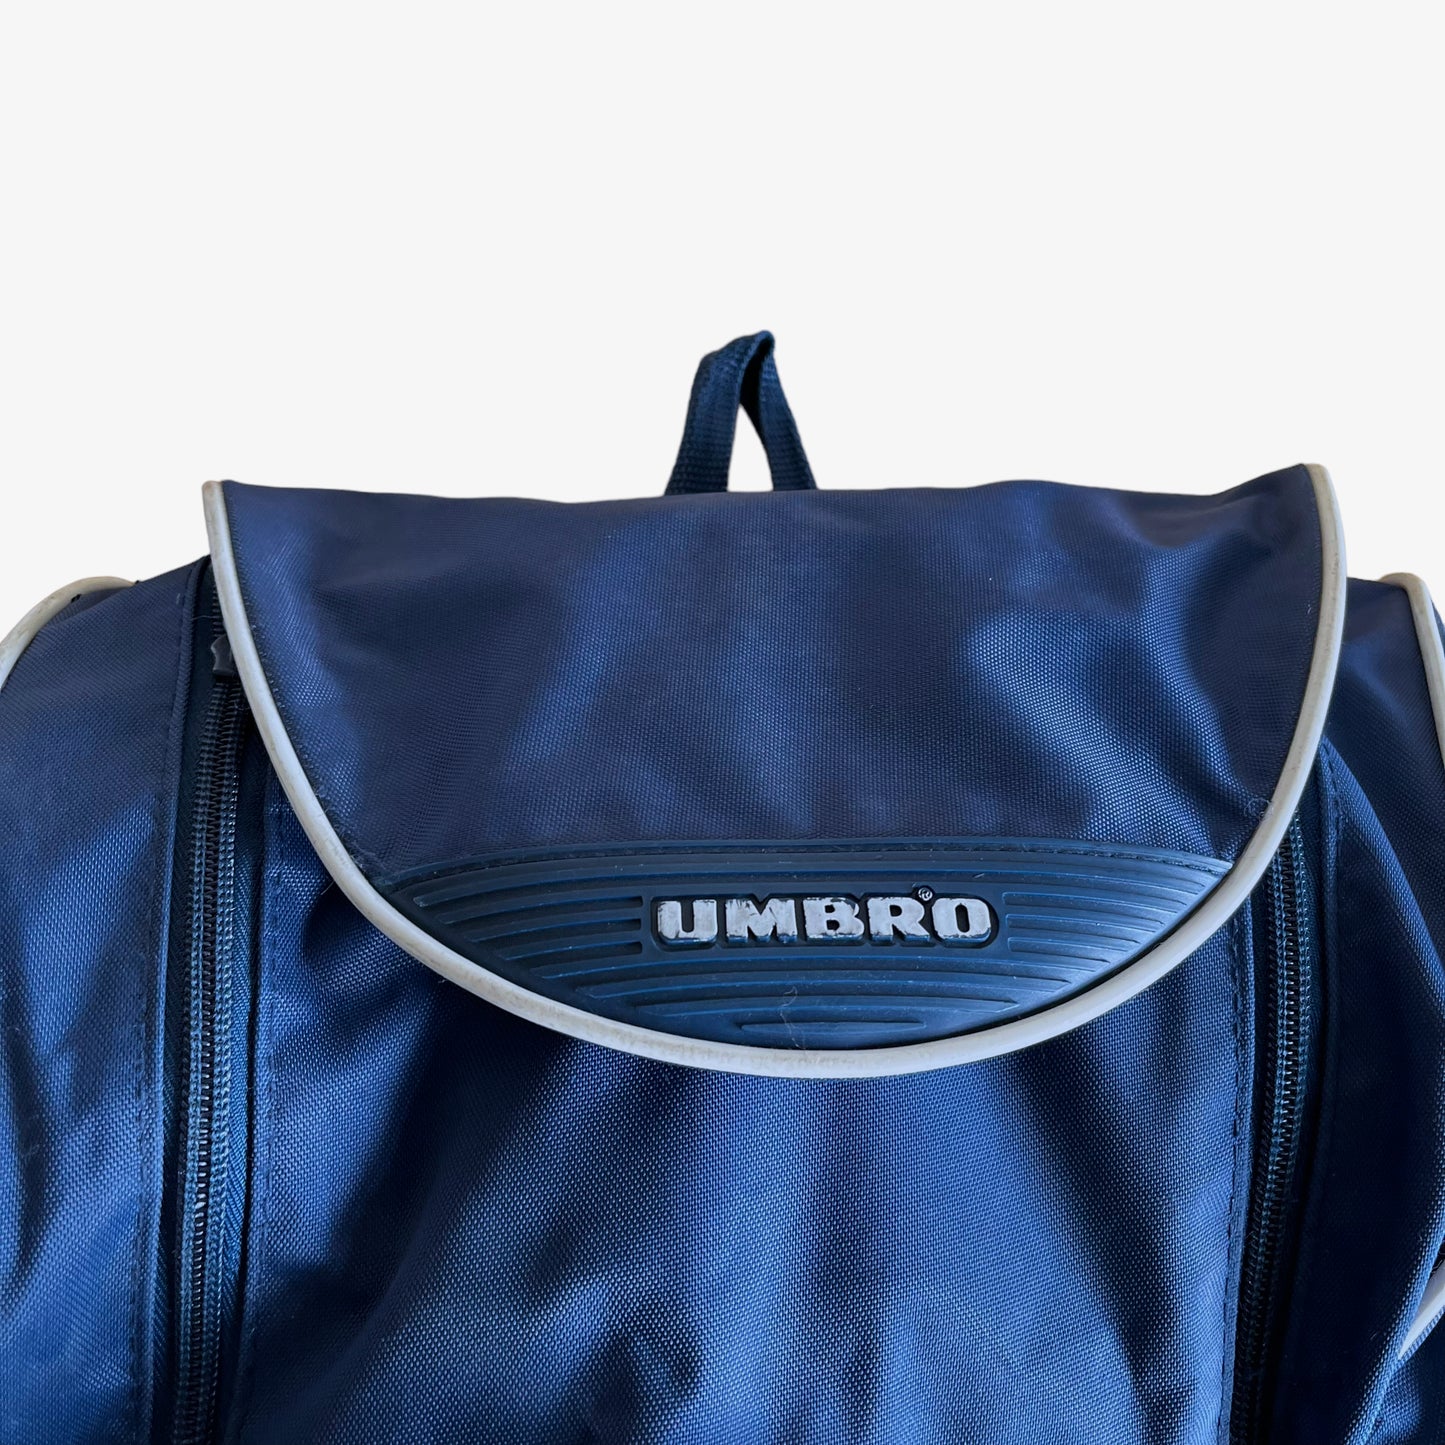 Vintage 90s Umbro Sports Big Blue Backpack Featuring An Embroidered Spell Out Logo Top Logo - Casspios Dream